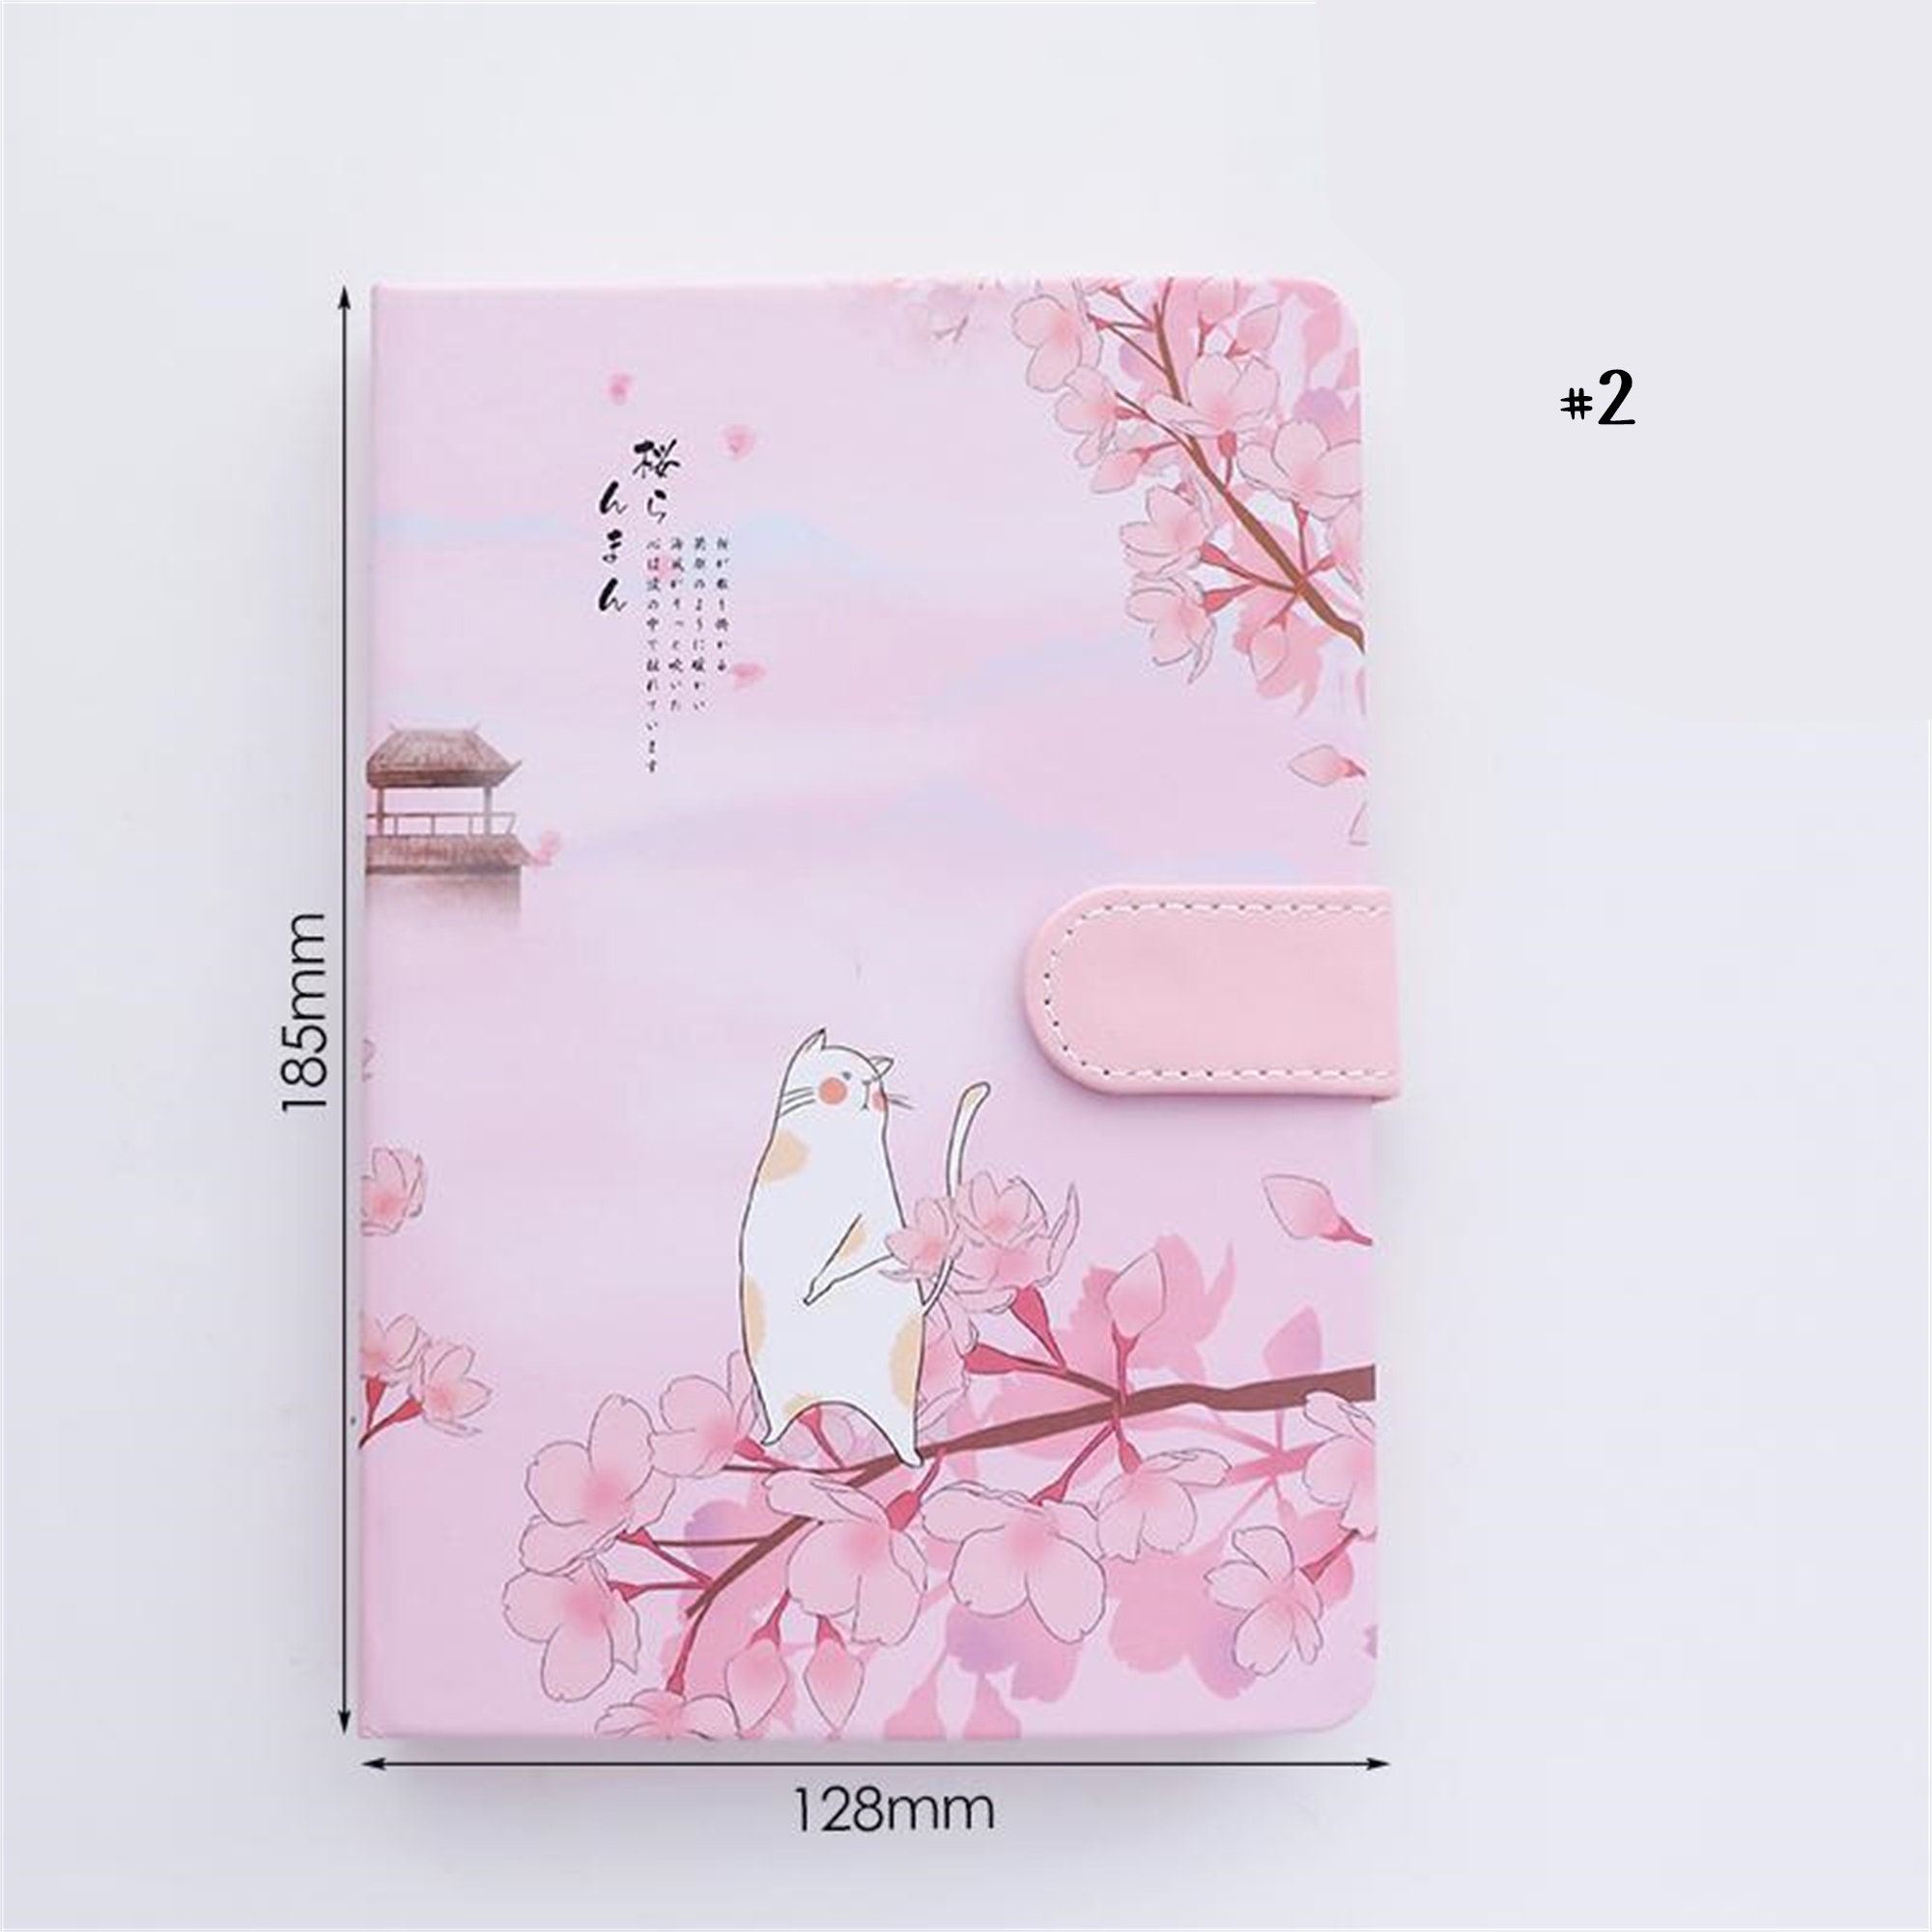 Cute Cartoon Notebook, Kawaii Journal Notebook Sakura Series Japanese  Sketchbook, Leather Cover Journal Diary Notebook with Magnetic Buckle  224pages